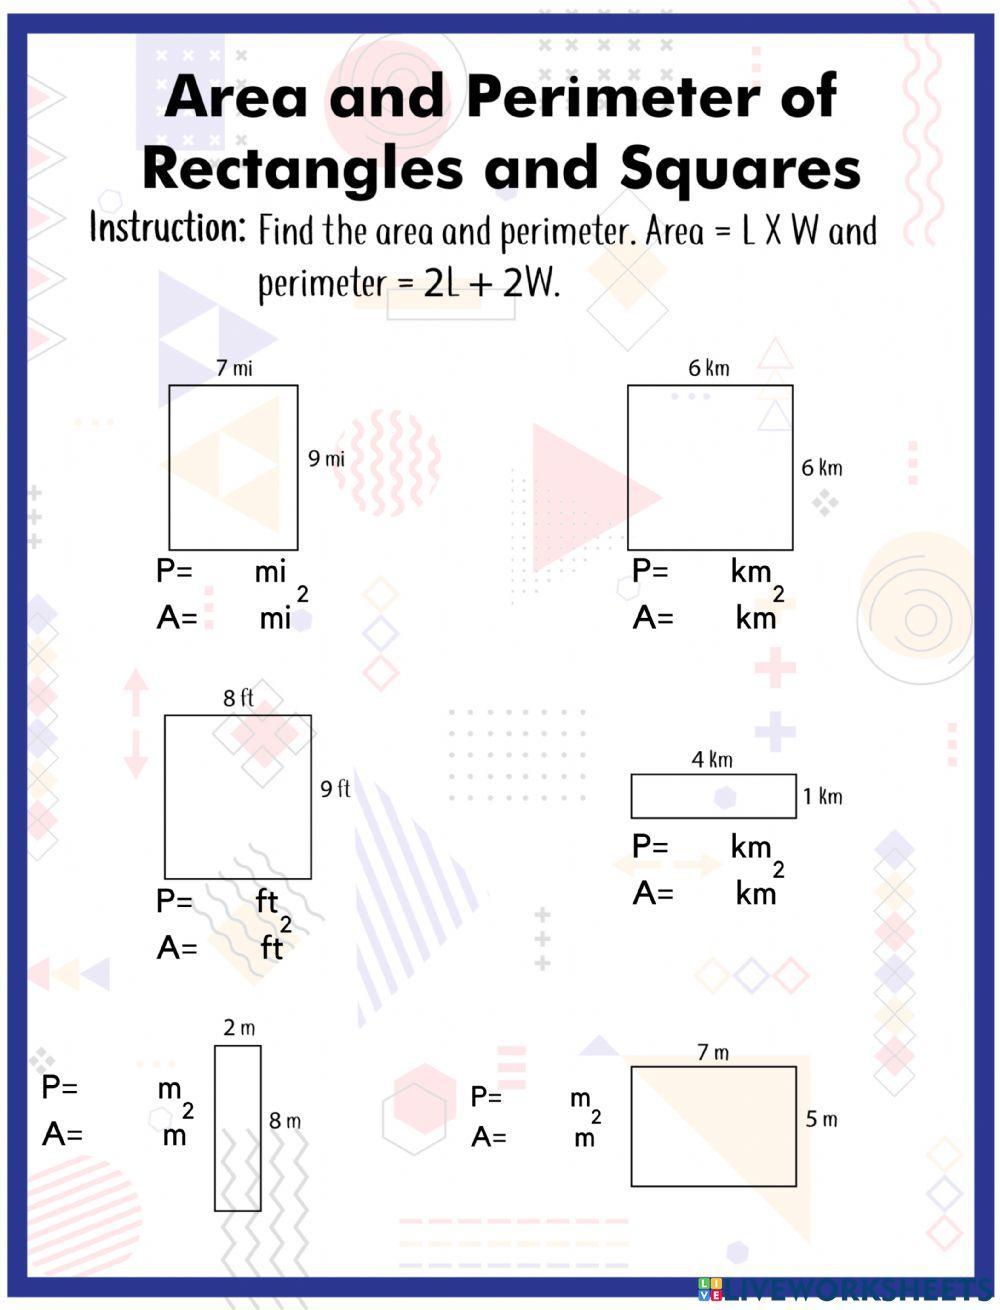 Area and Perimeter of Rectangles and Squares